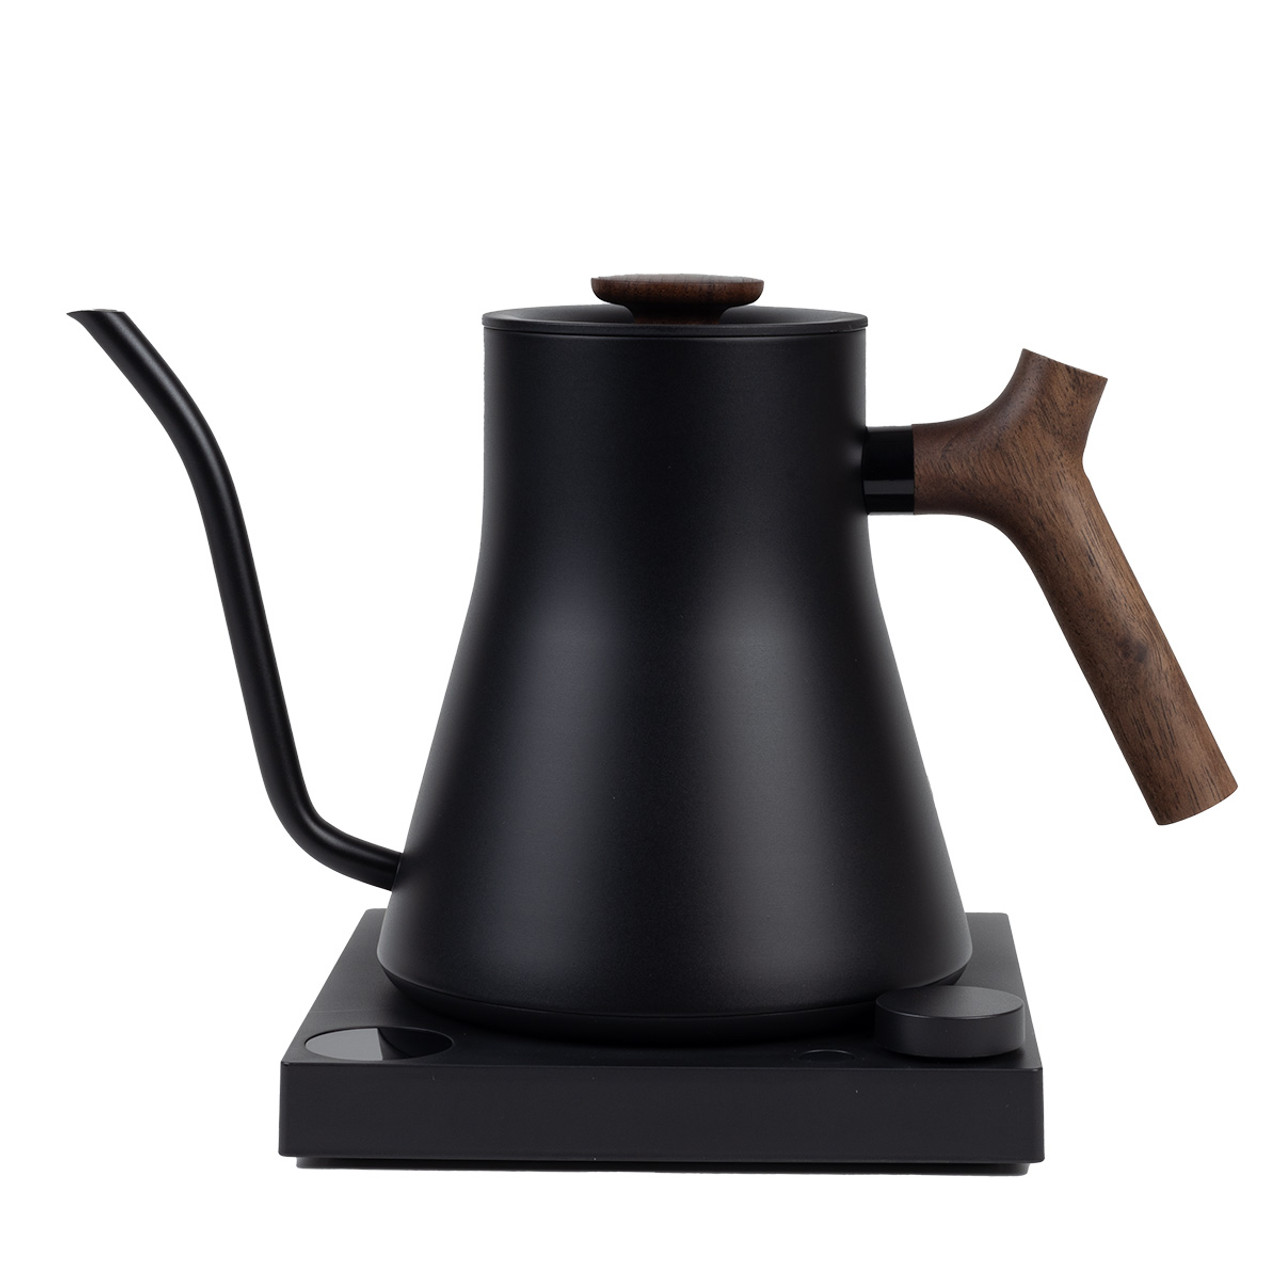 https://cdn11.bigcommerce.com/s-6h7ychjk4/images/stencil/1280x1280/products/11126/94513/Fellow-Stagg-EKG-Pro-Electric-Pouring-Kettle-Walnut-WBG-1__95564.1668100689.jpg?c=1&imbypass=on